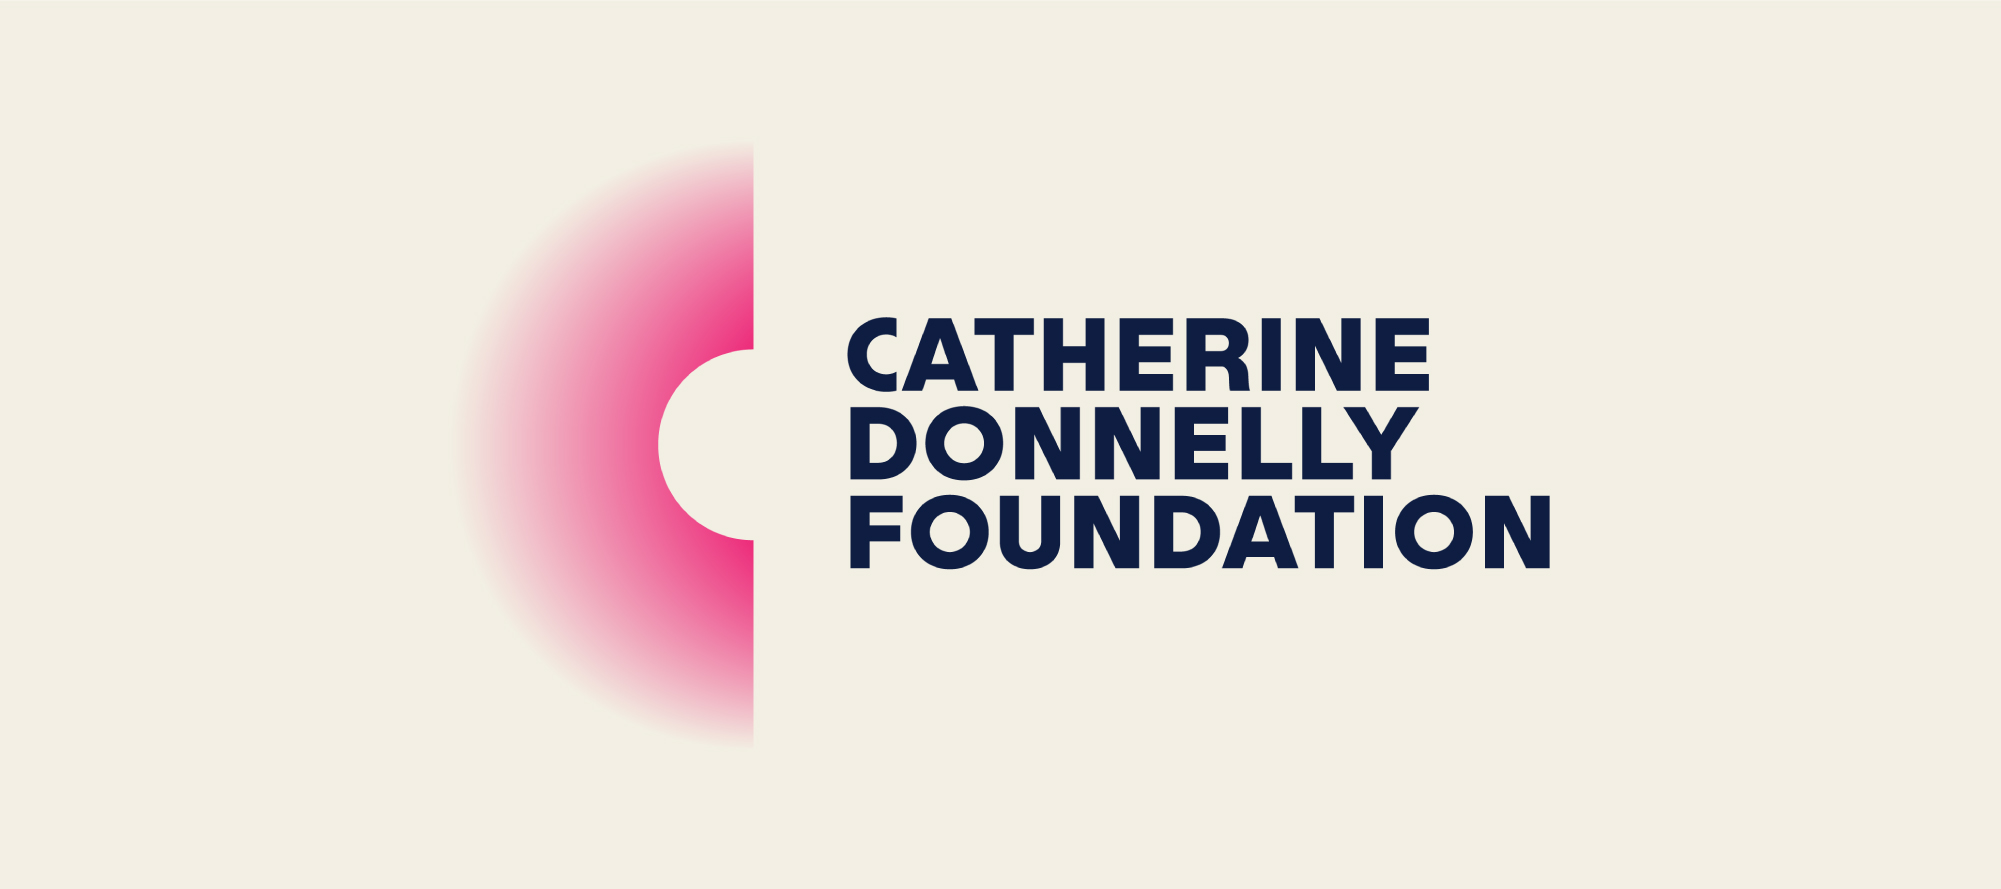 The nonprofit logo of the Catherine Donnelly Foundation, which is shaped like a pink C with light radiating from it.